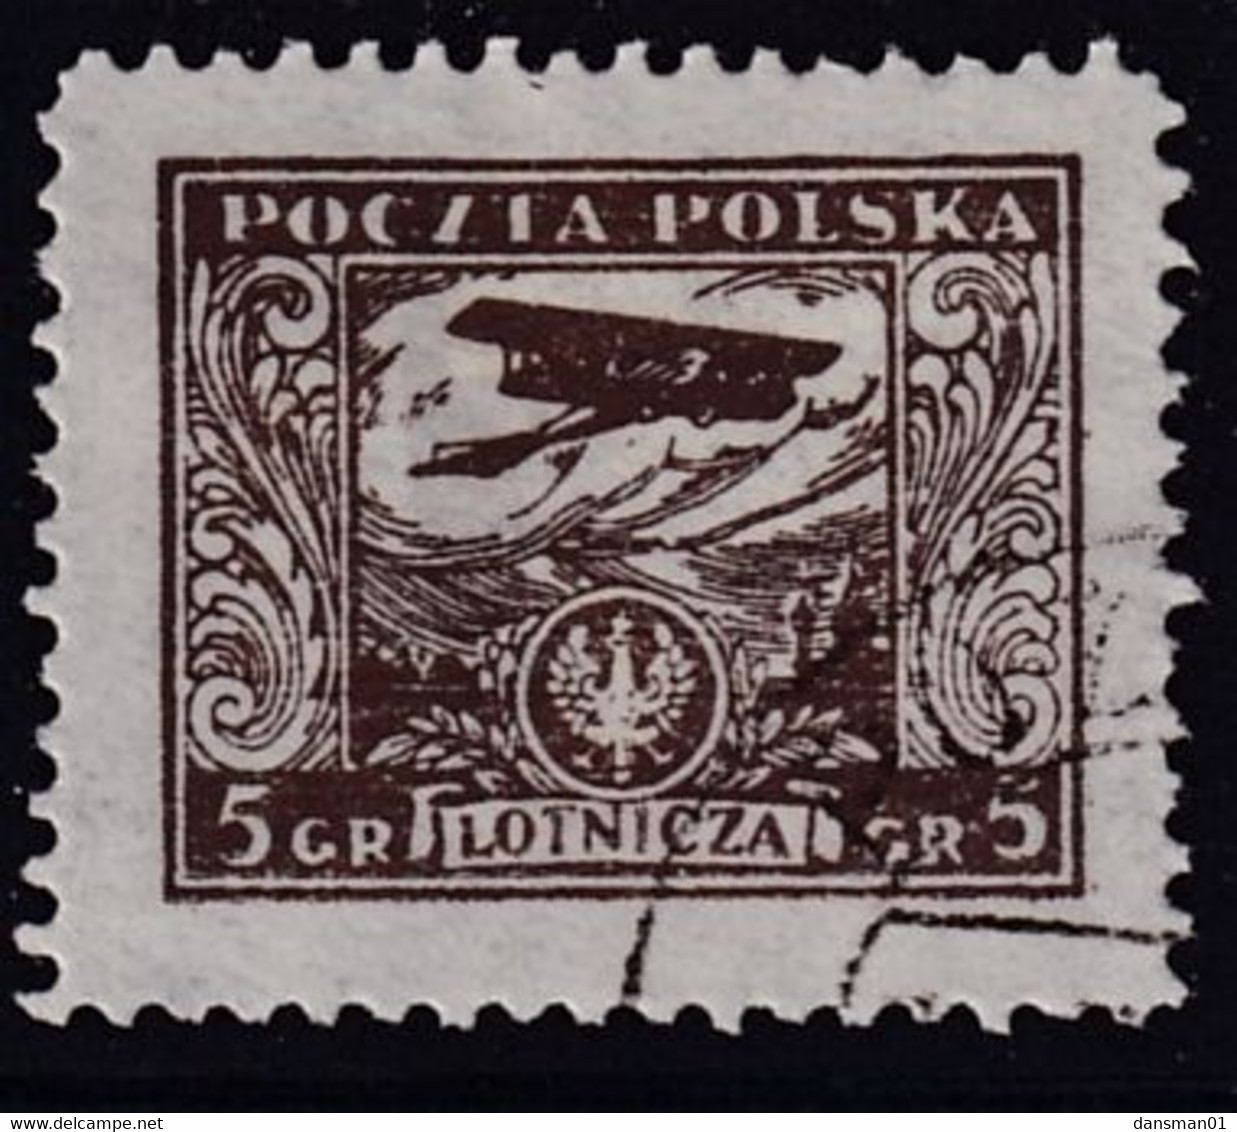 POLAND 1925 Airmail Sc 219FF Forgery Used - Used Stamps